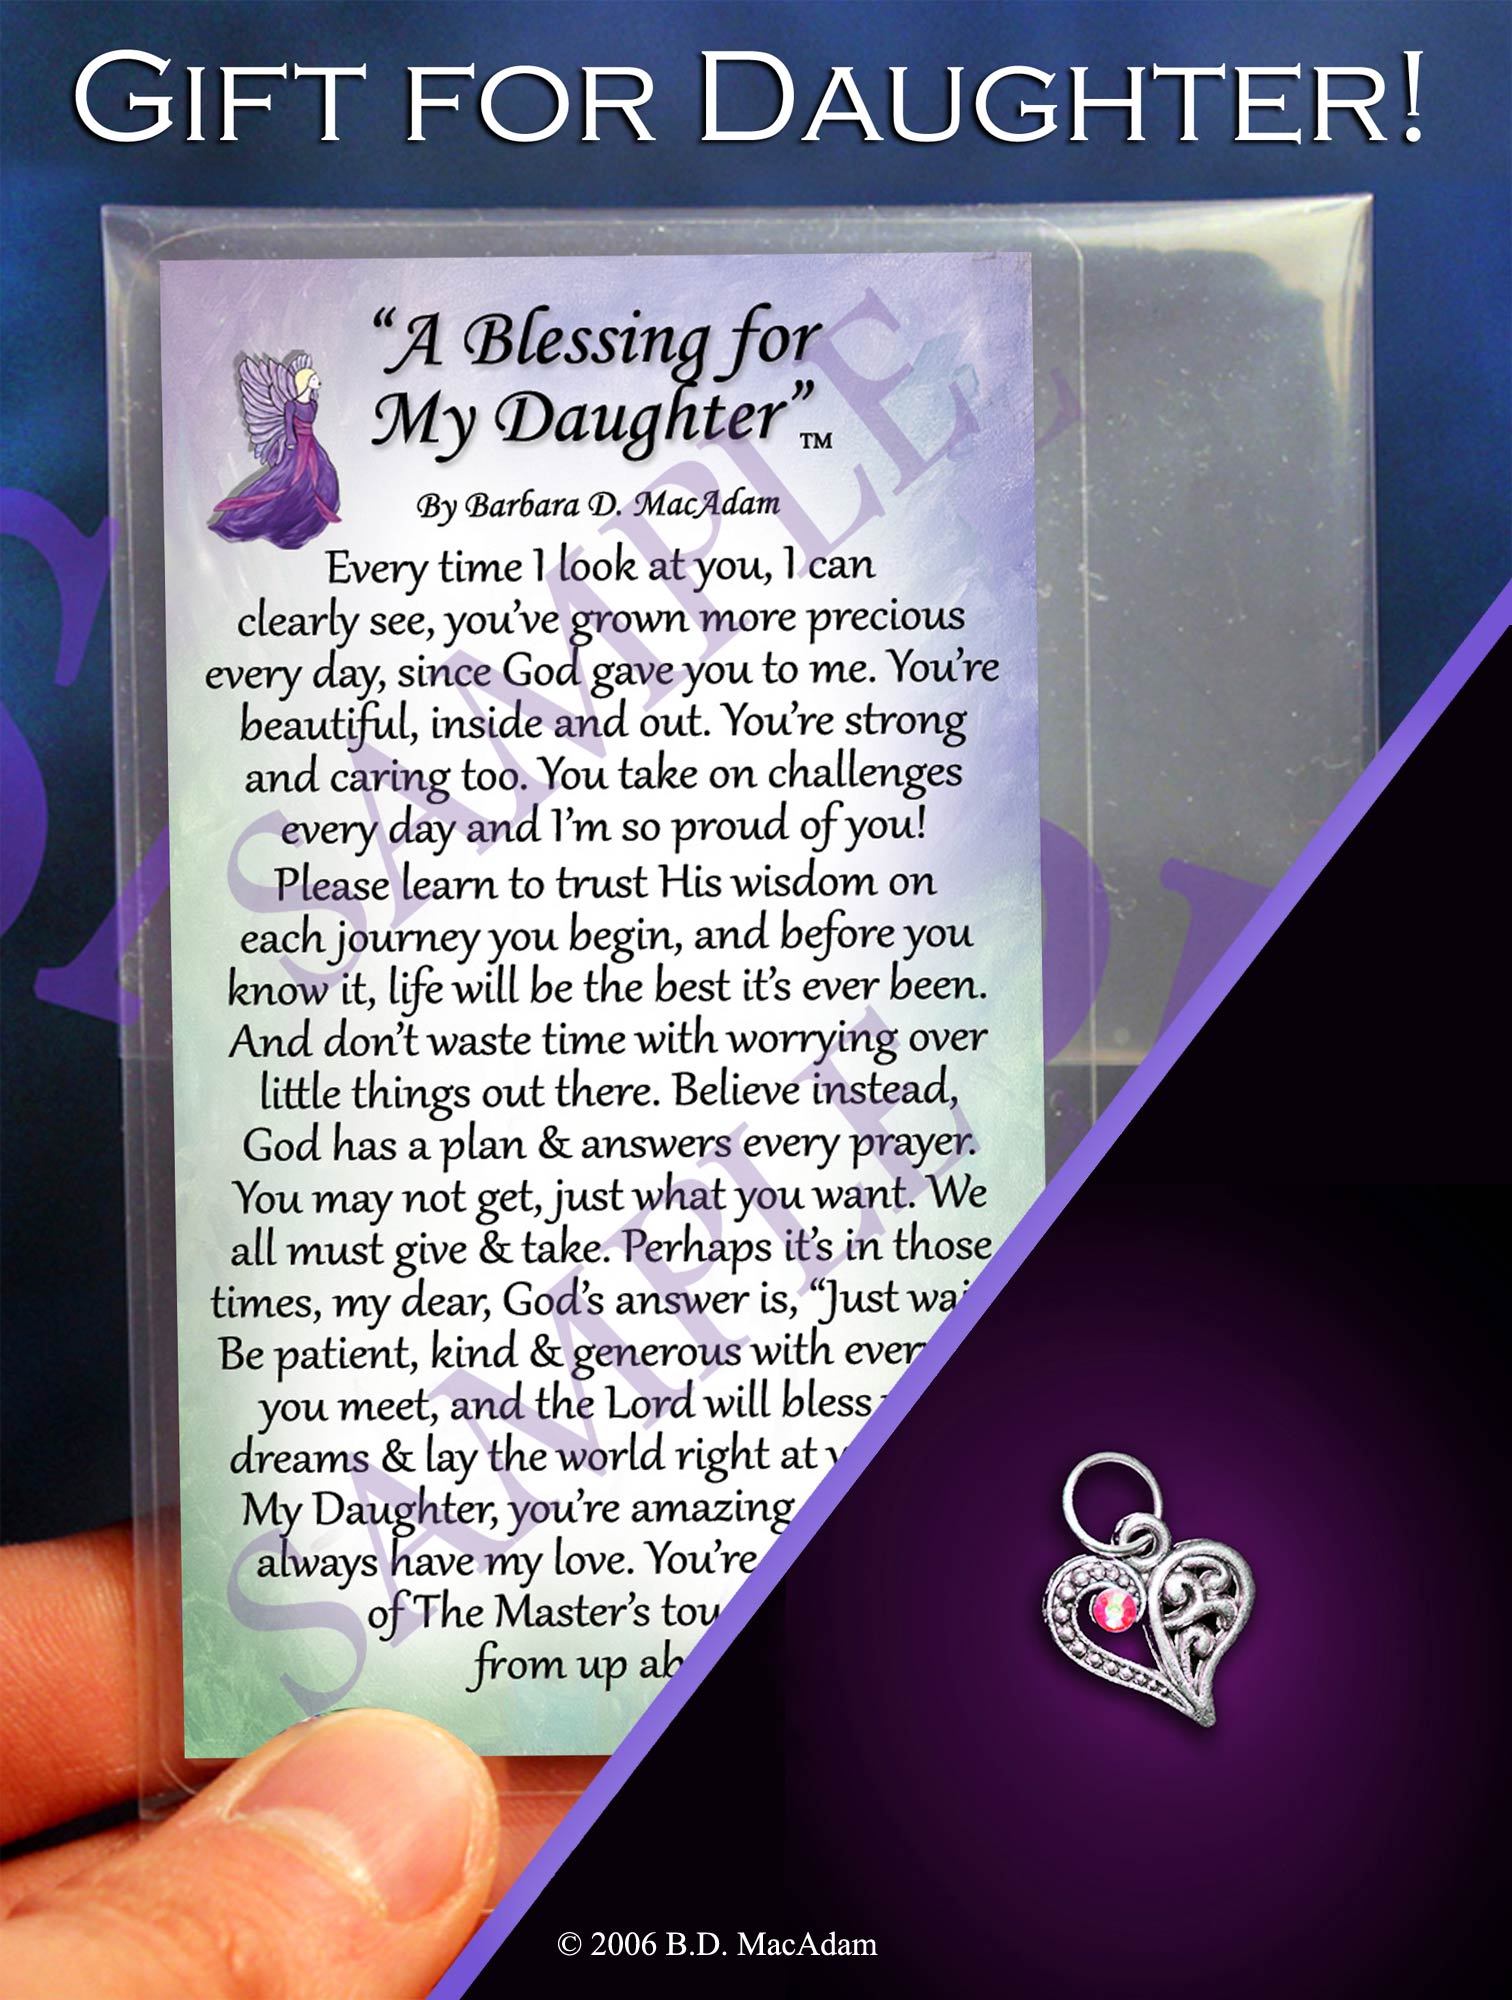 A Blessing for My Daughter - Pocket Blessing | PurpleWishingGate.com